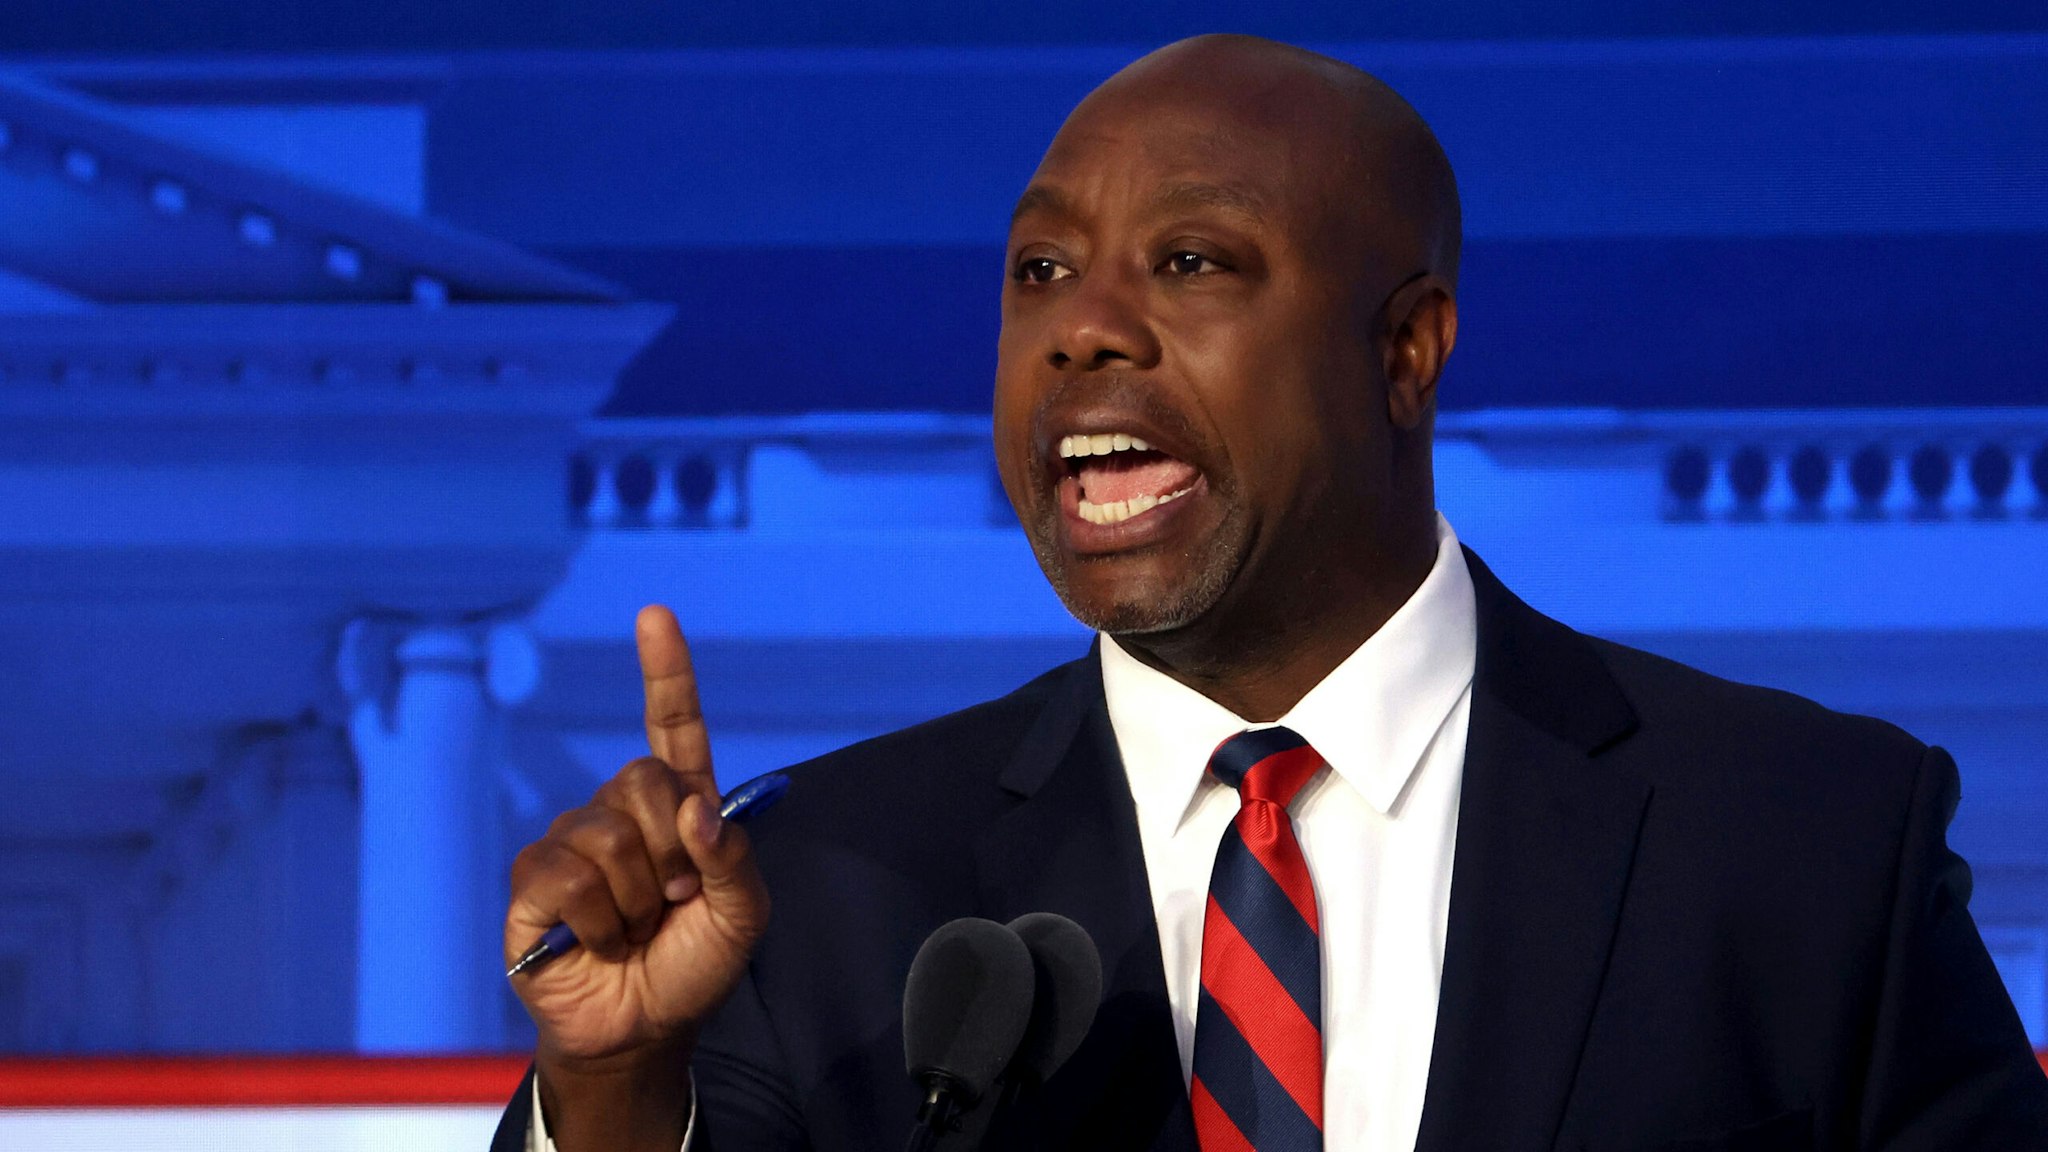 SIMI VALLEY, CALIFORNIA - SEPTEMBER 27: Republican presidential candidate U.S. Sen. Tim Scott (R-SC) delivers remarks during the FOX Business Republican Primary Debate at the Ronald Reagan Presidential Library on September 27, 2023 in Simi Valley, California. Seven presidential hopefuls squared off in the second Republican primary debate as former U.S. President Donald Trump, currently facing indictments in four locations, declined again to participate.